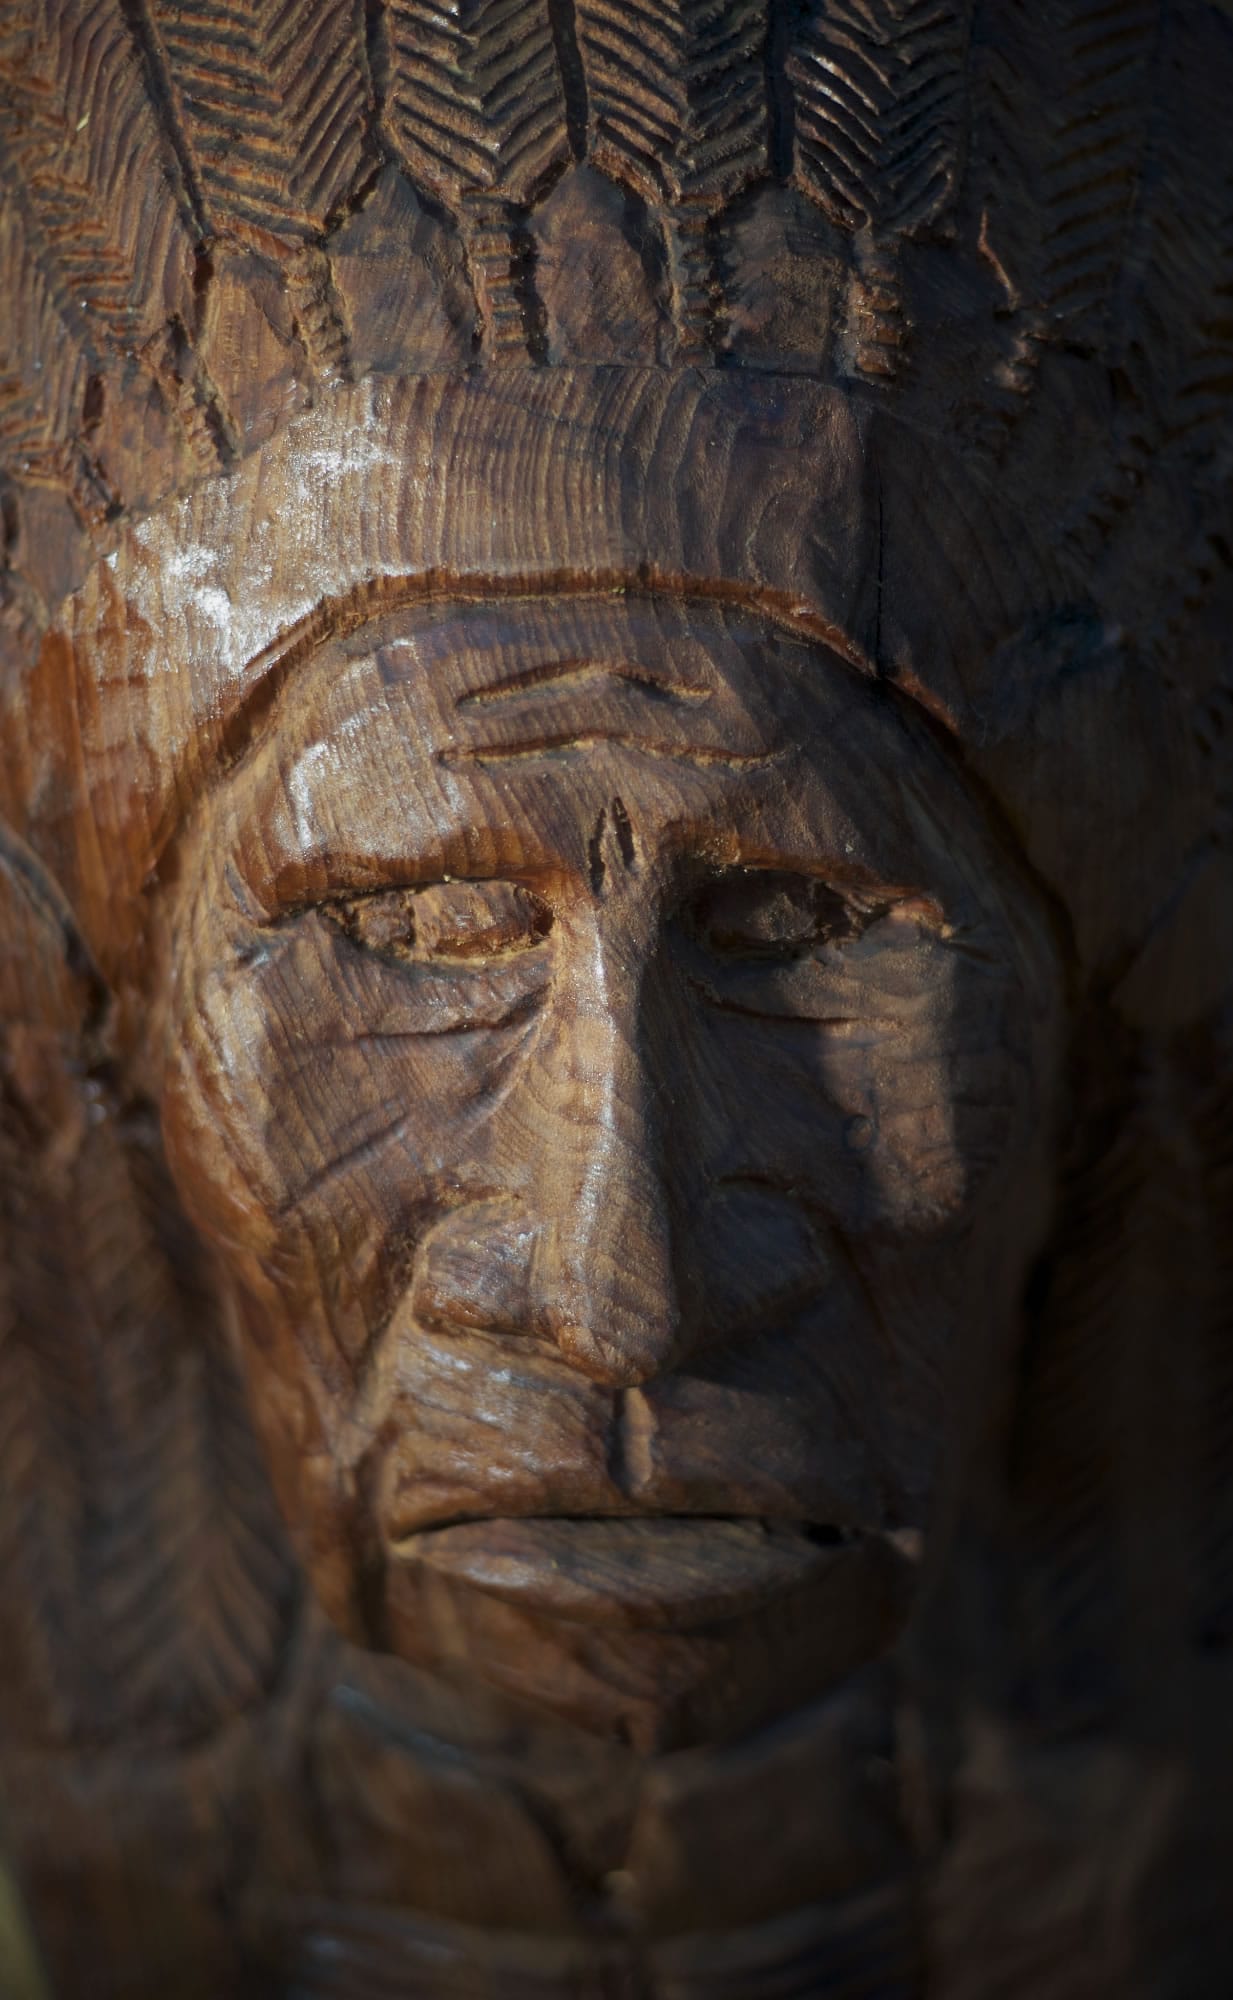 This wood carving of an American Indian chief is one example of how Ken Craig's craft connects him to his Lakota heritage.